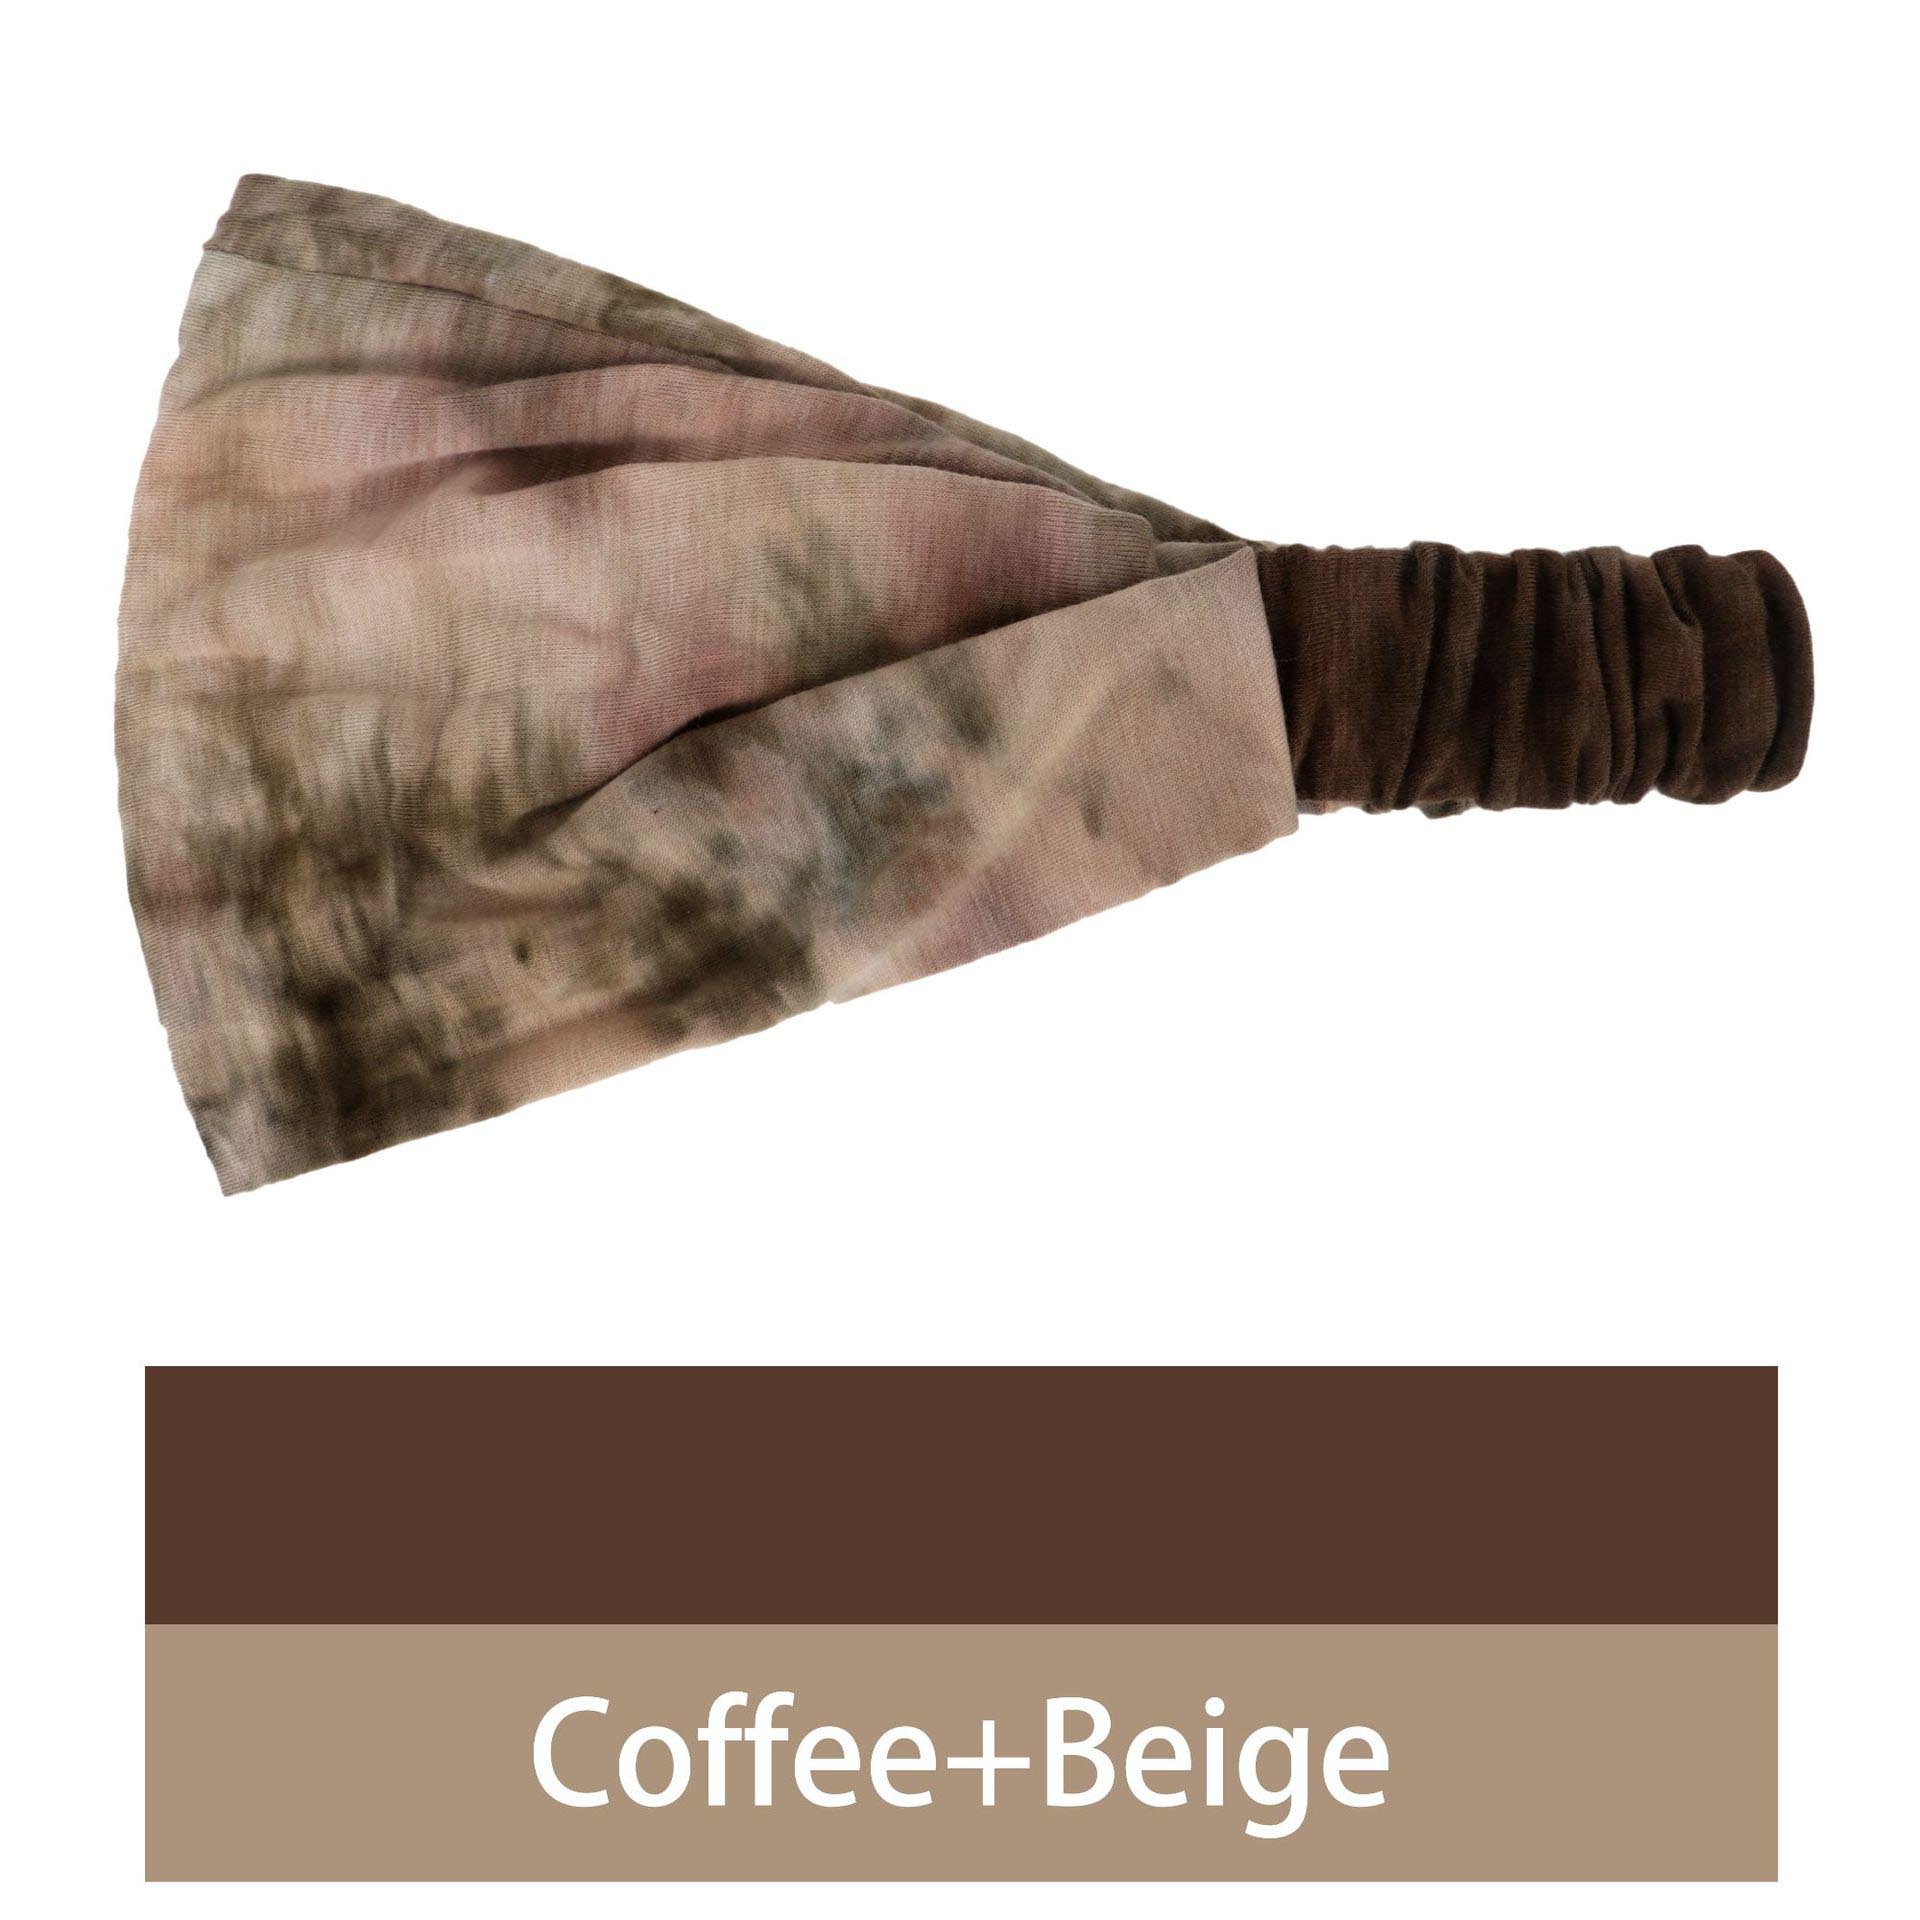 Coffee and beige